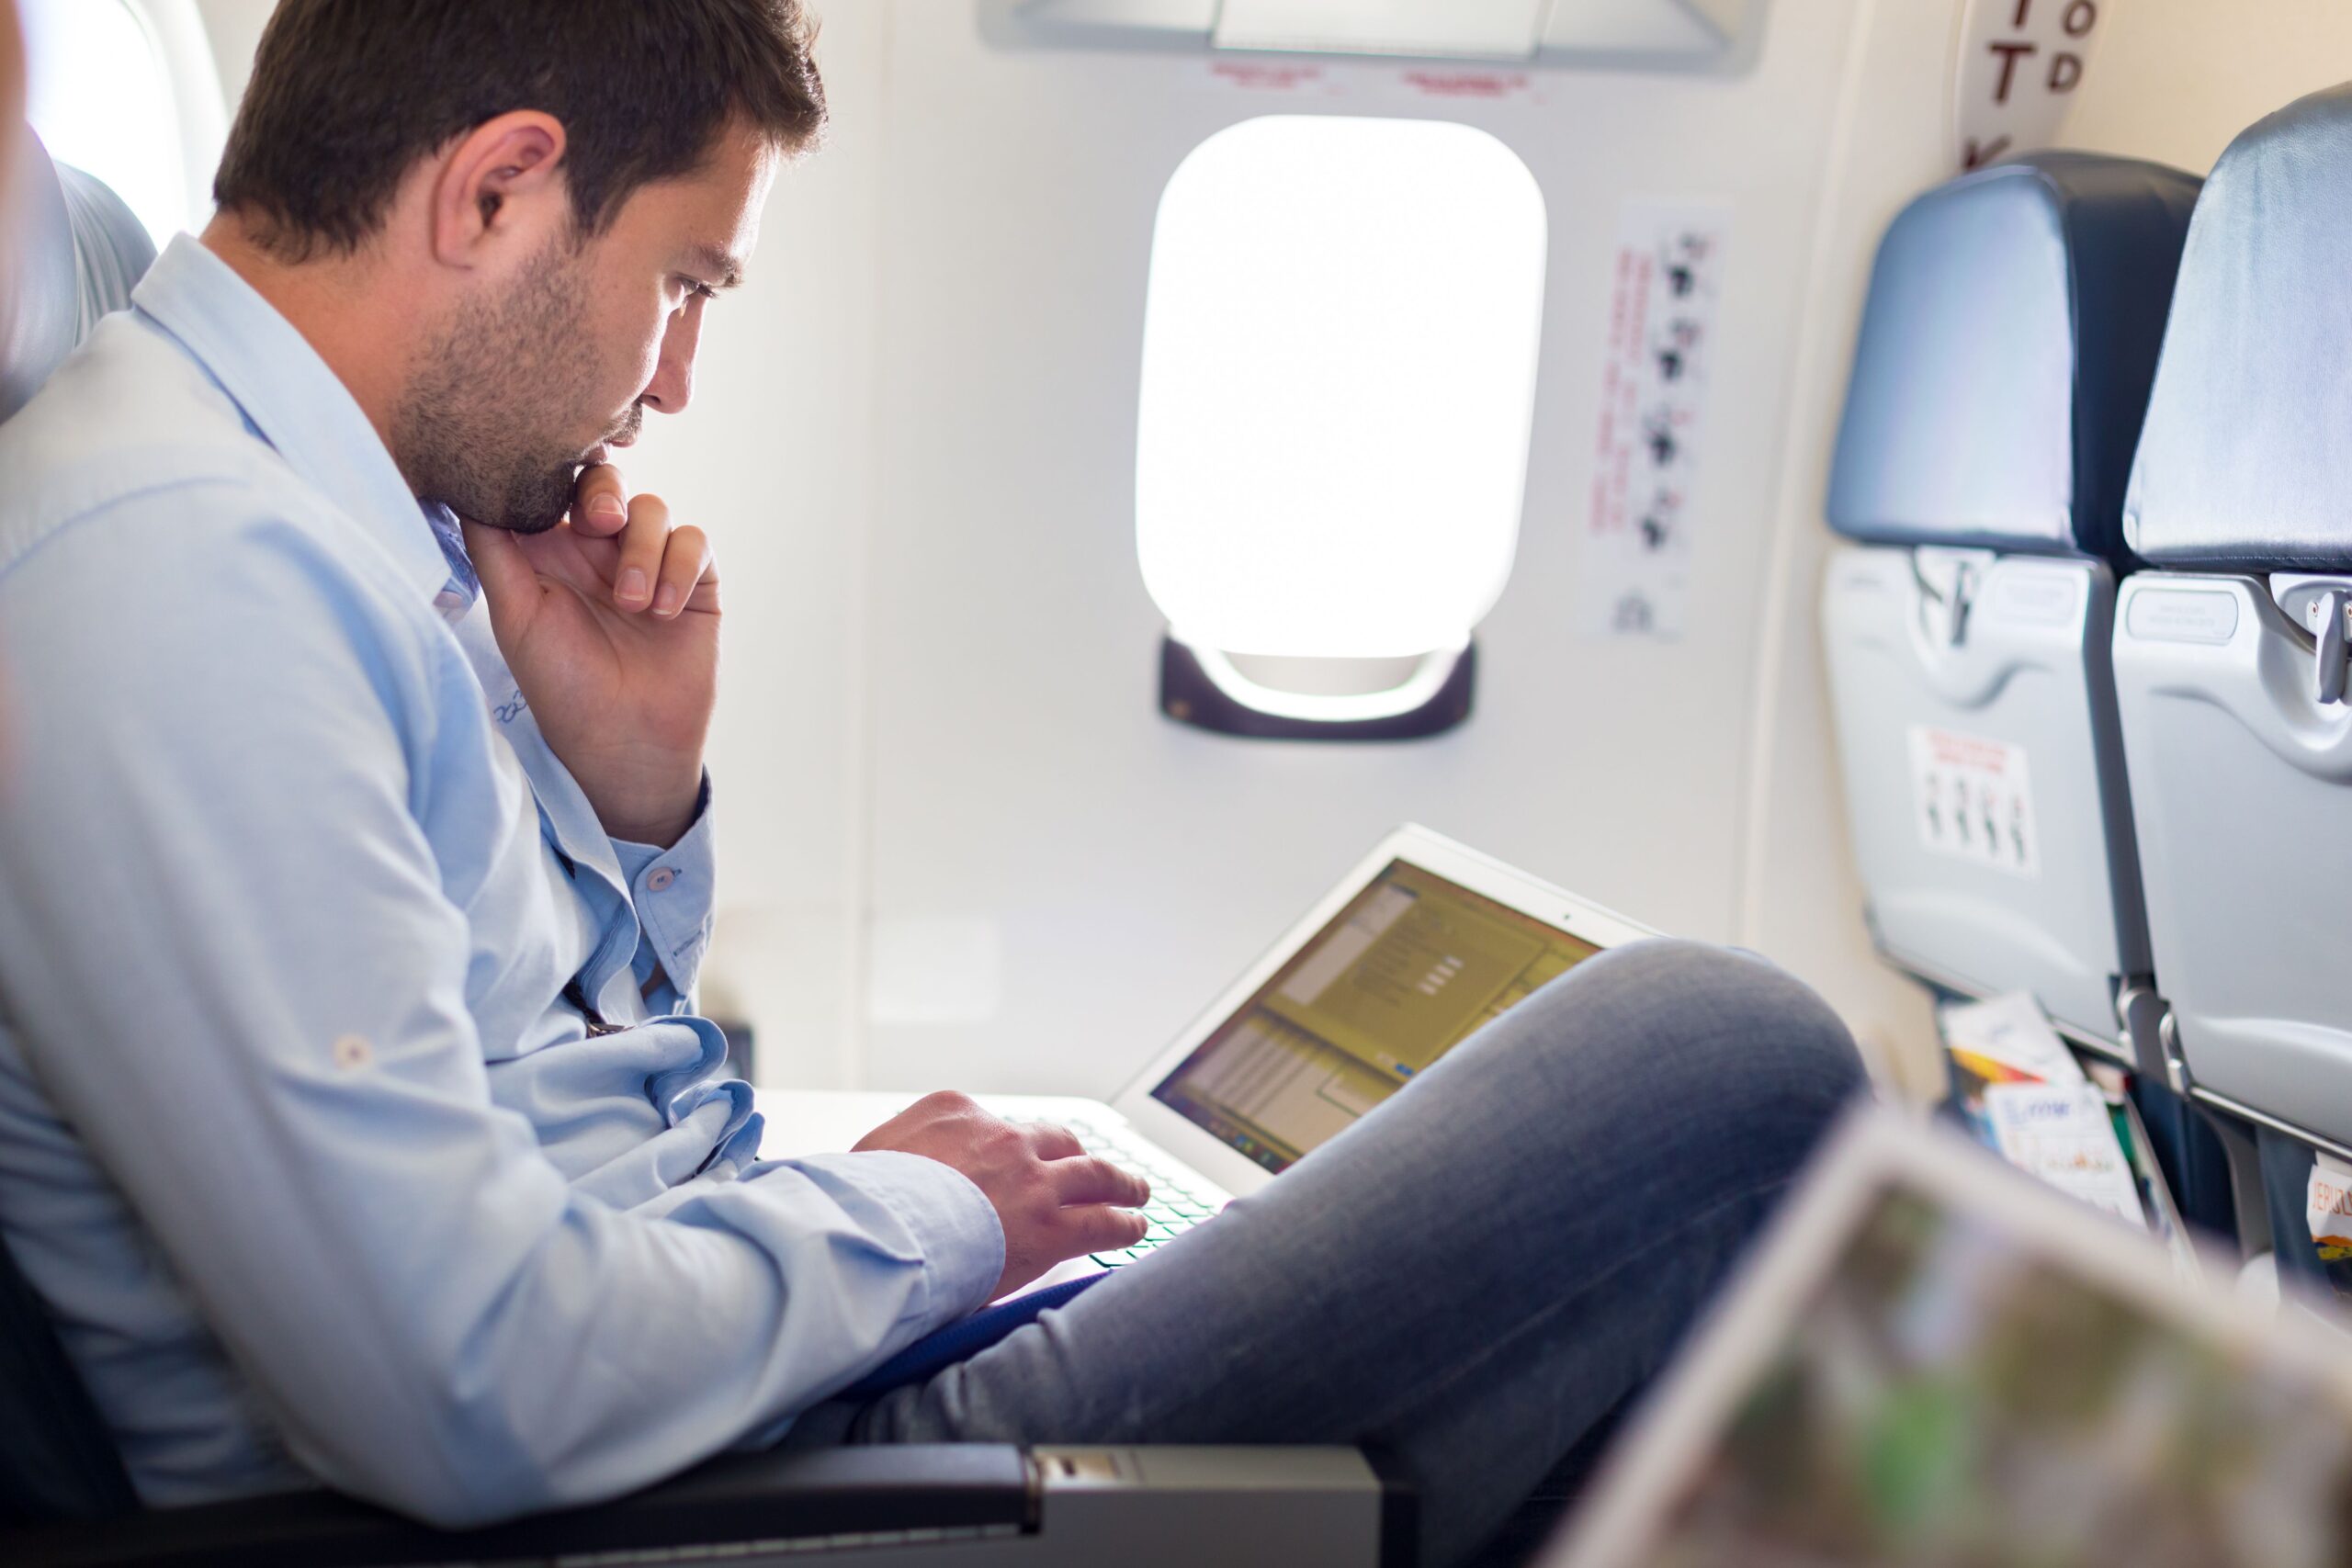 Forget about speed, the business jet performance metrics that matter most to executives are often the bandwidth, speed and coverage area of onboard connectivity equipment